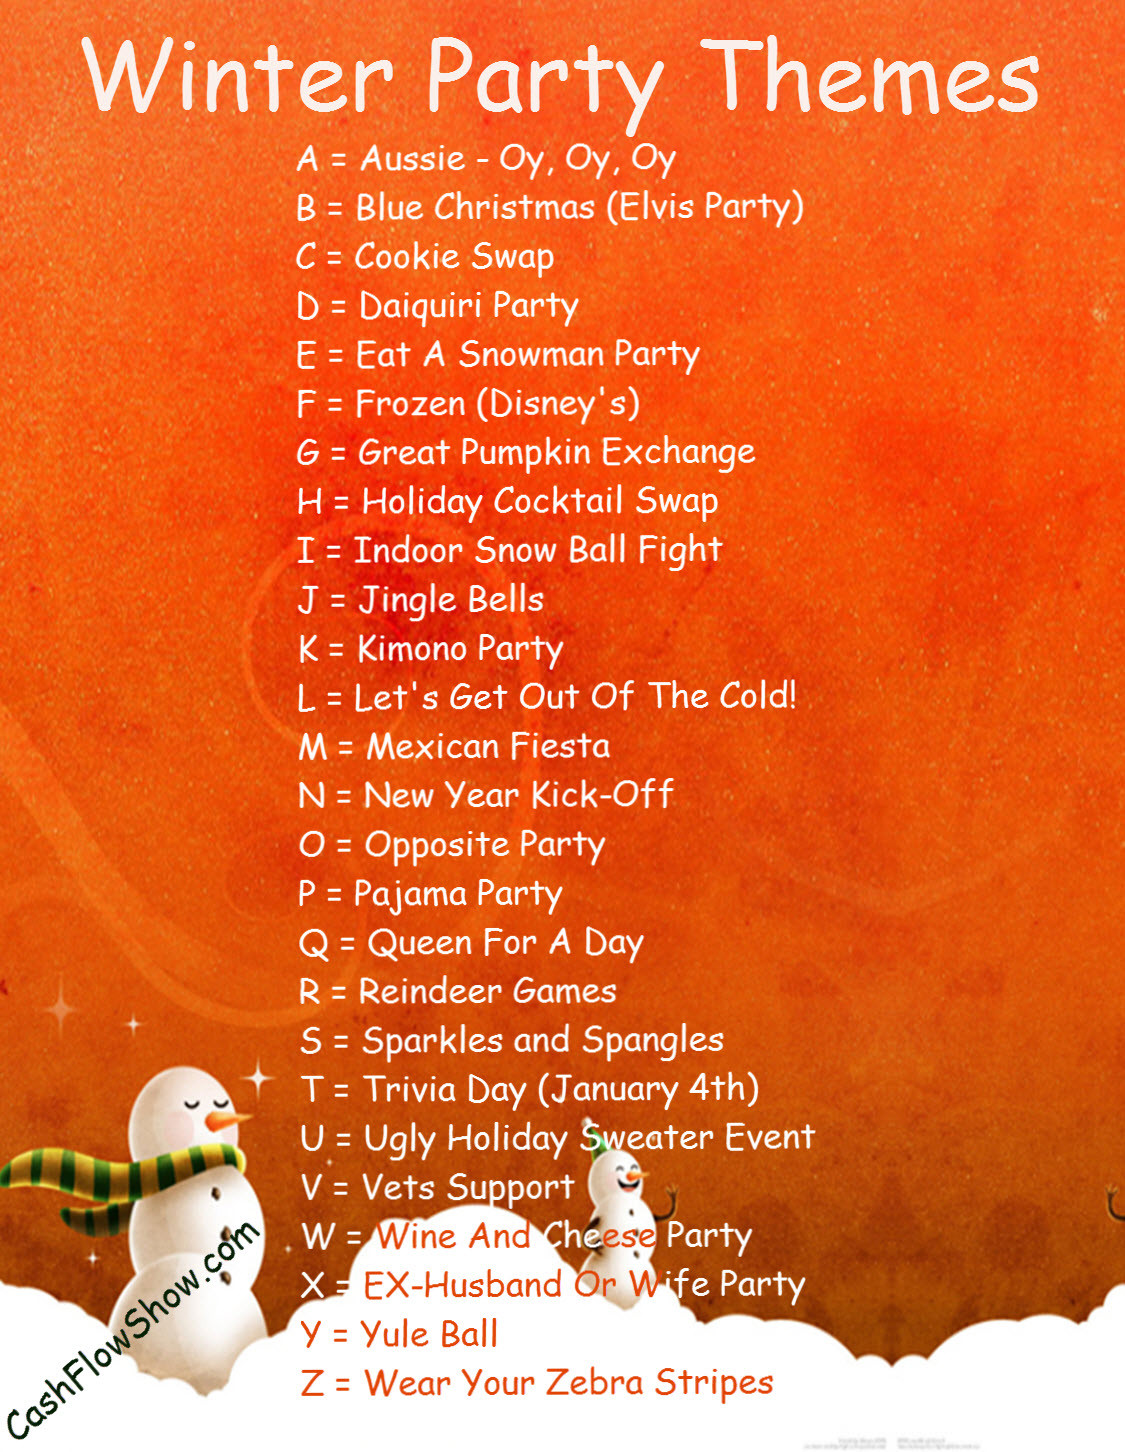 Fun Work Holiday Party Ideas
 Read A Z List To Find A Winter Party Theme For Your Event